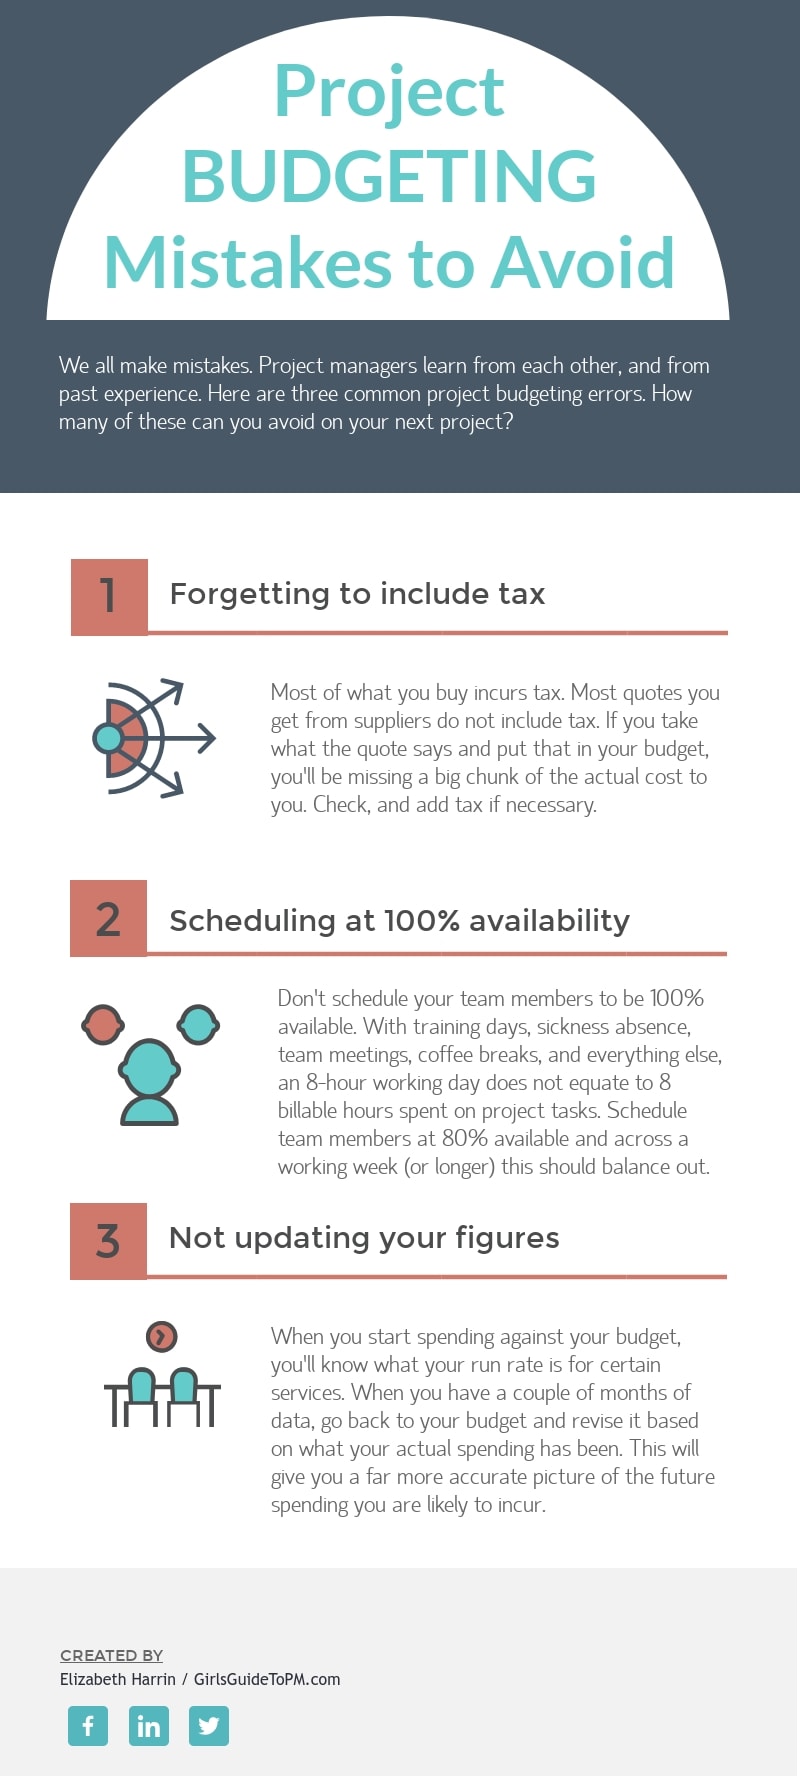 Infographic showing common budget mistakes including forgetting to include tax, scheduling at 100% availability and not updating figures